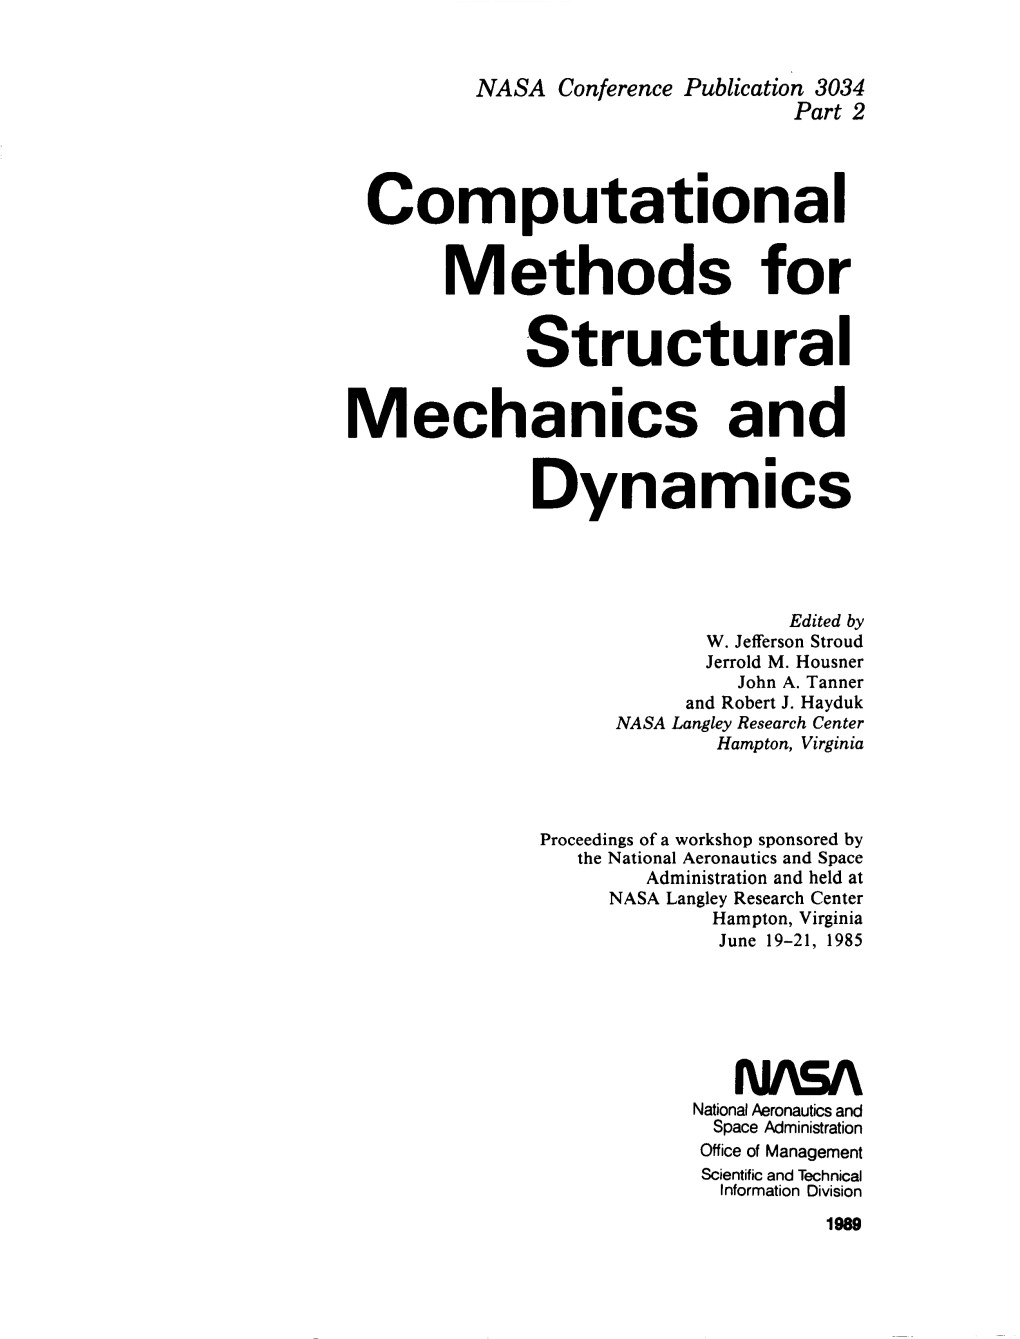 Computational Methods for Structural Mechanics and Dynamics